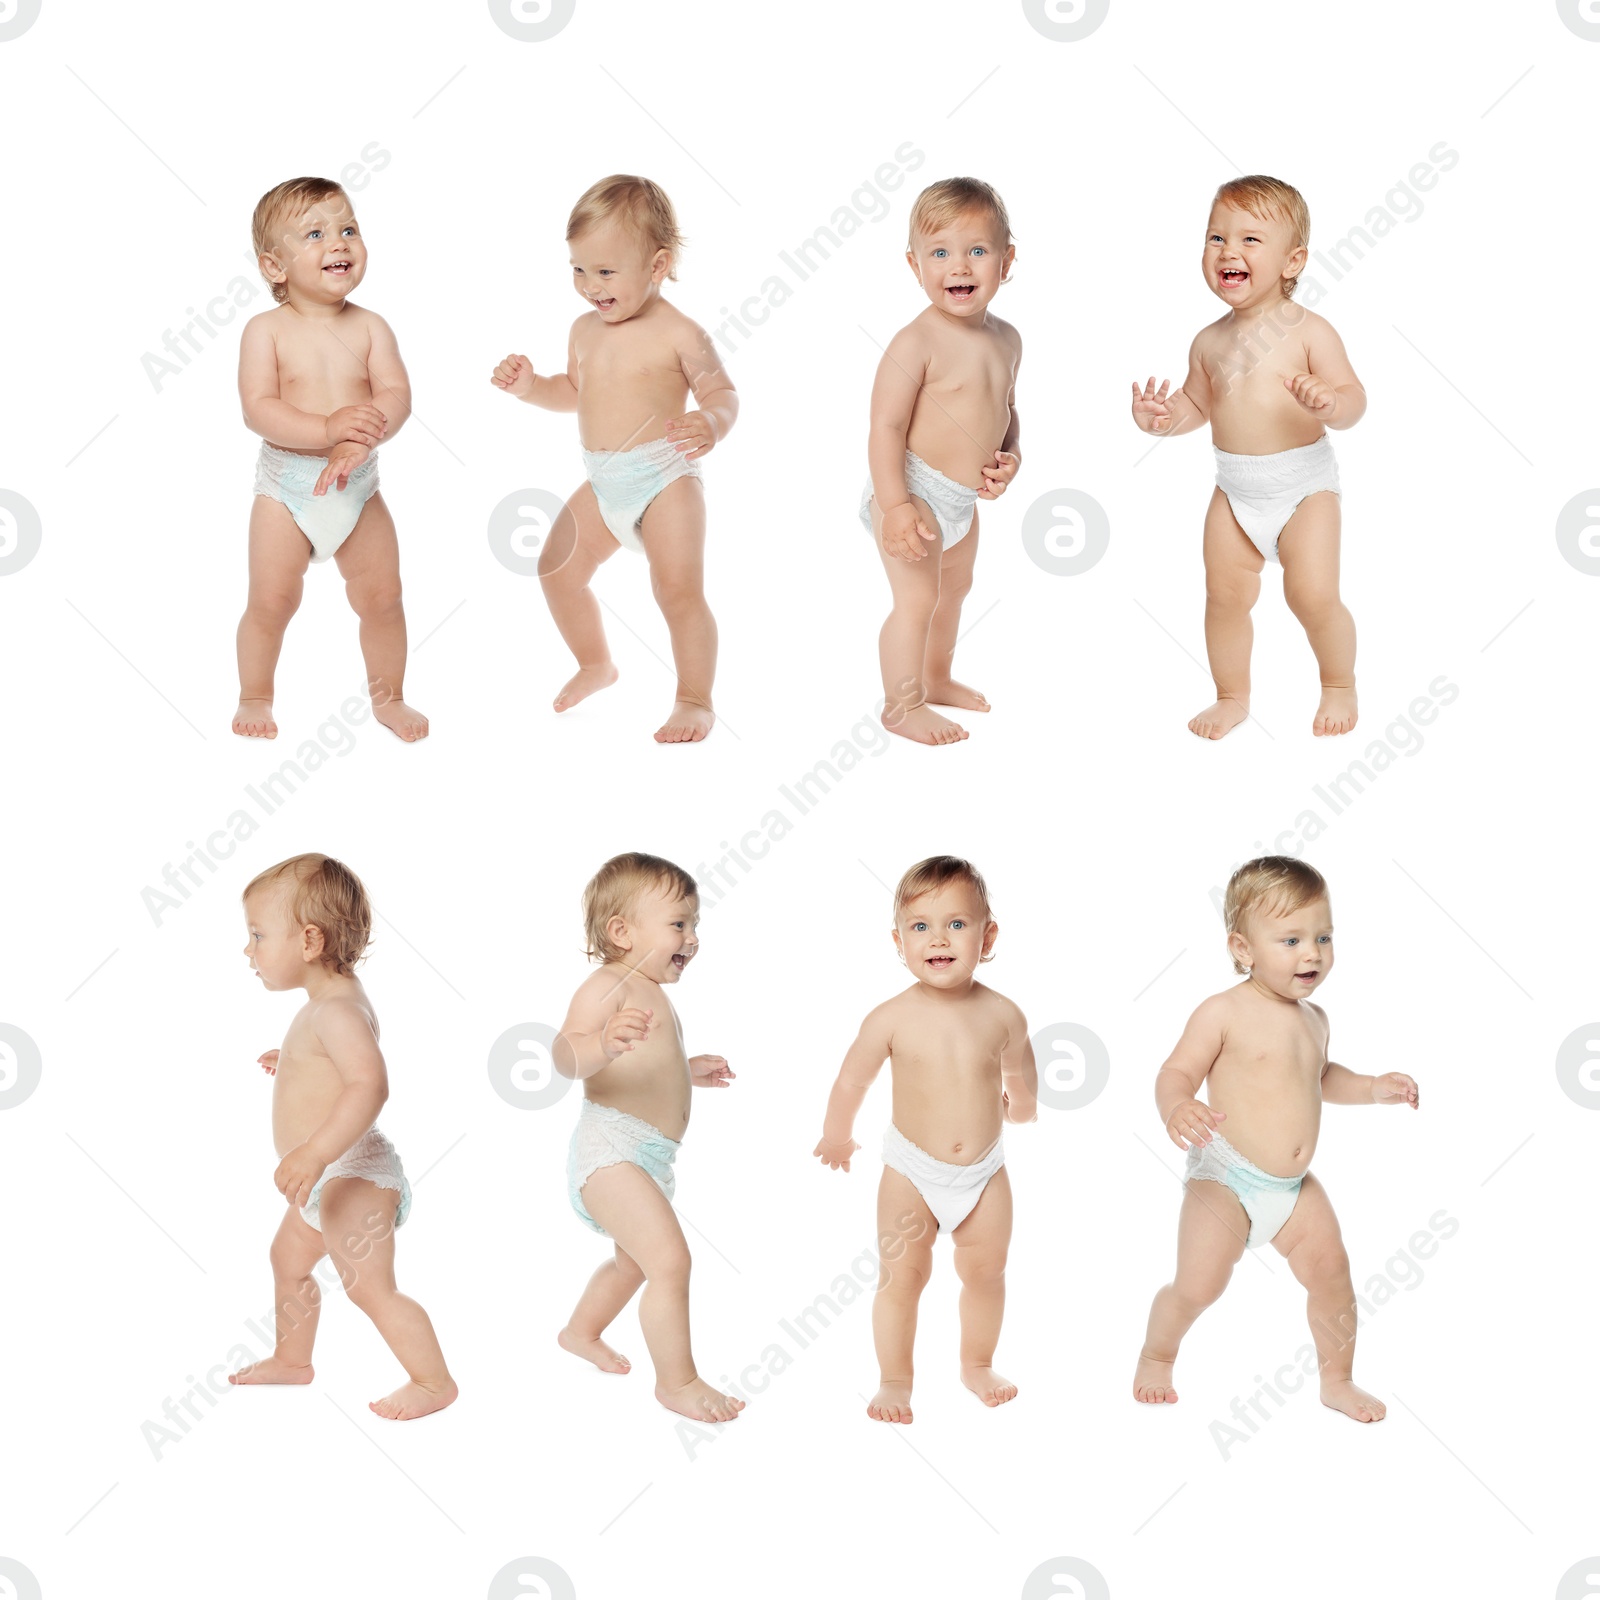 Image of Collage with photos of cute baby learning to walk on white background